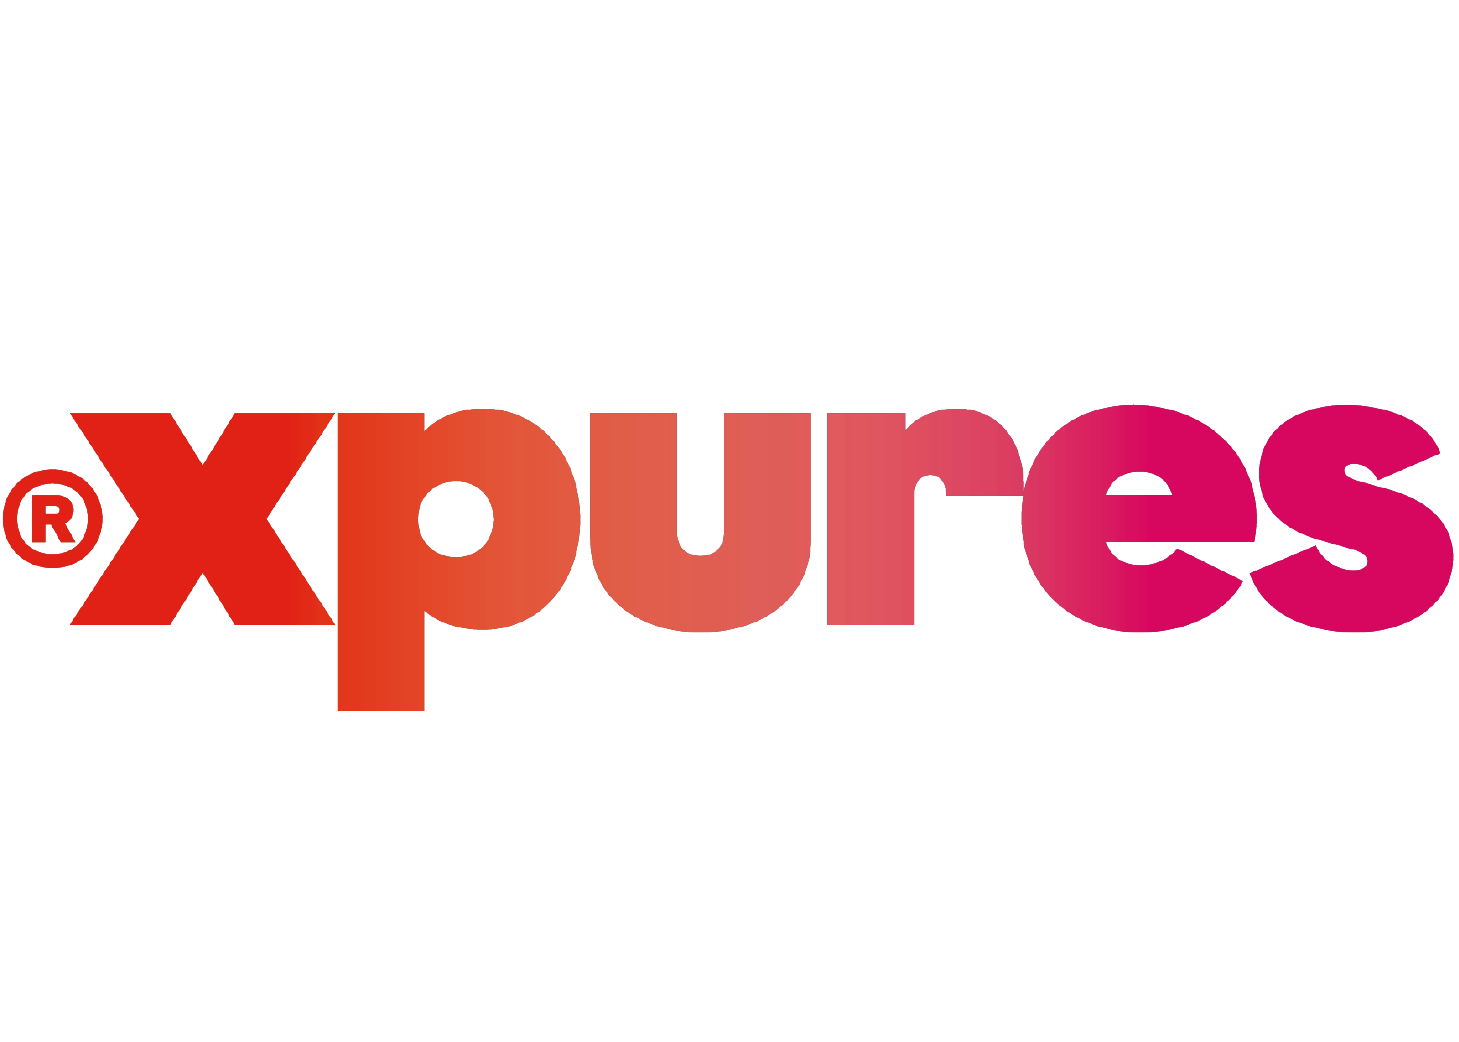 Powered by xpures - extend yourself